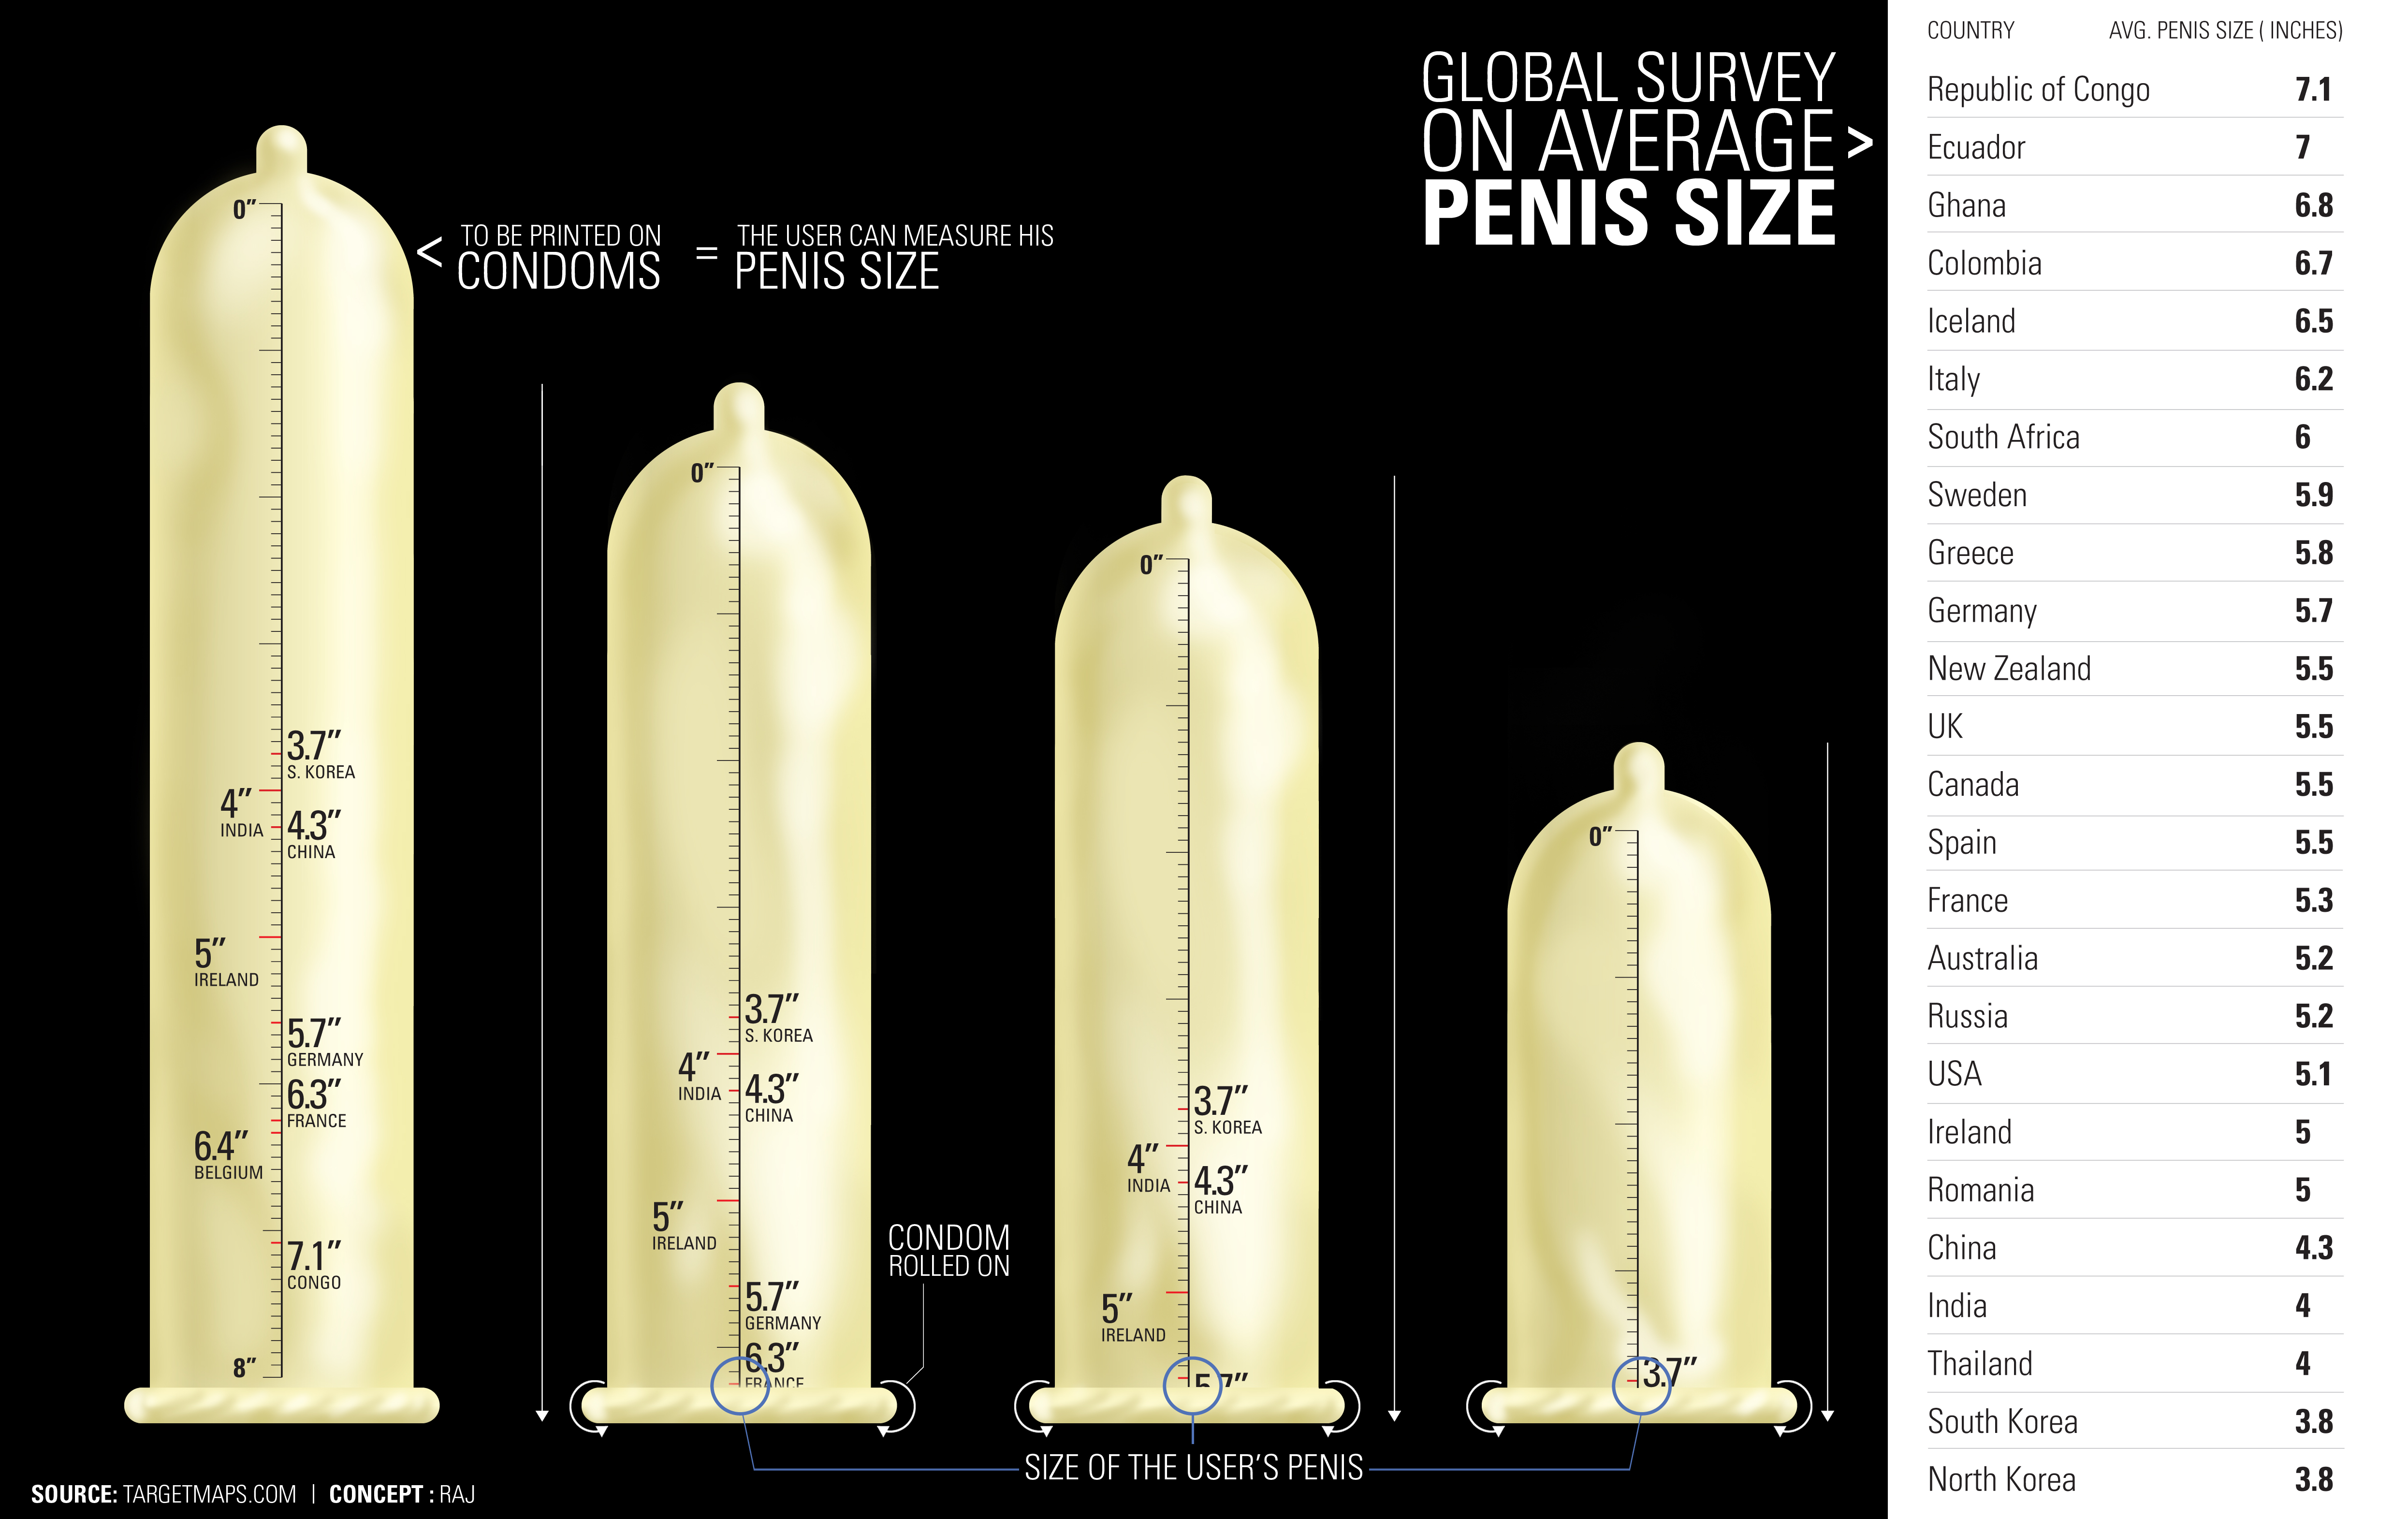 The ideal penis size for women is bigger than average